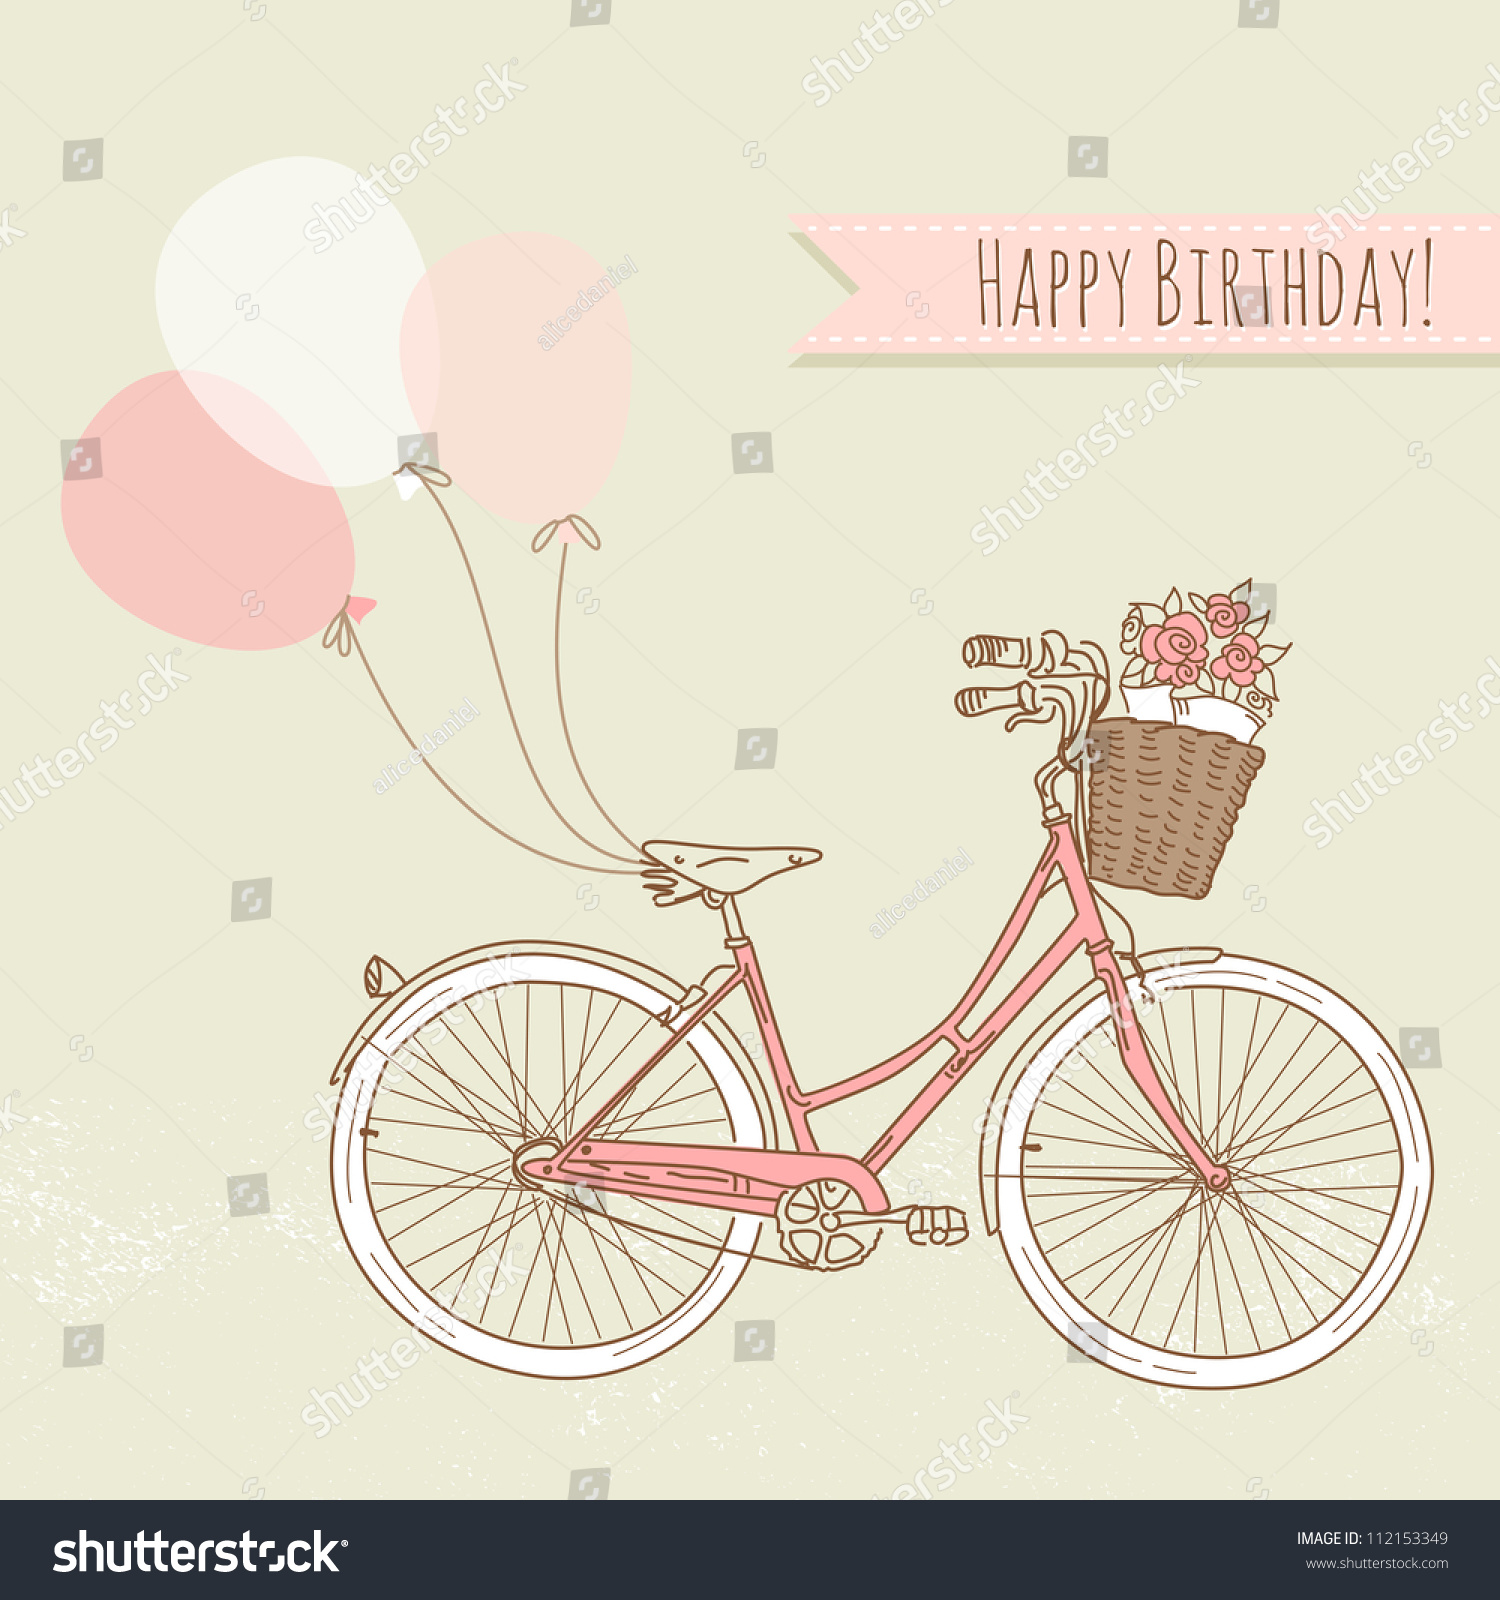 Bicycle With Balloons And A Basket Full Of Flowers, Romantic Birthday ...